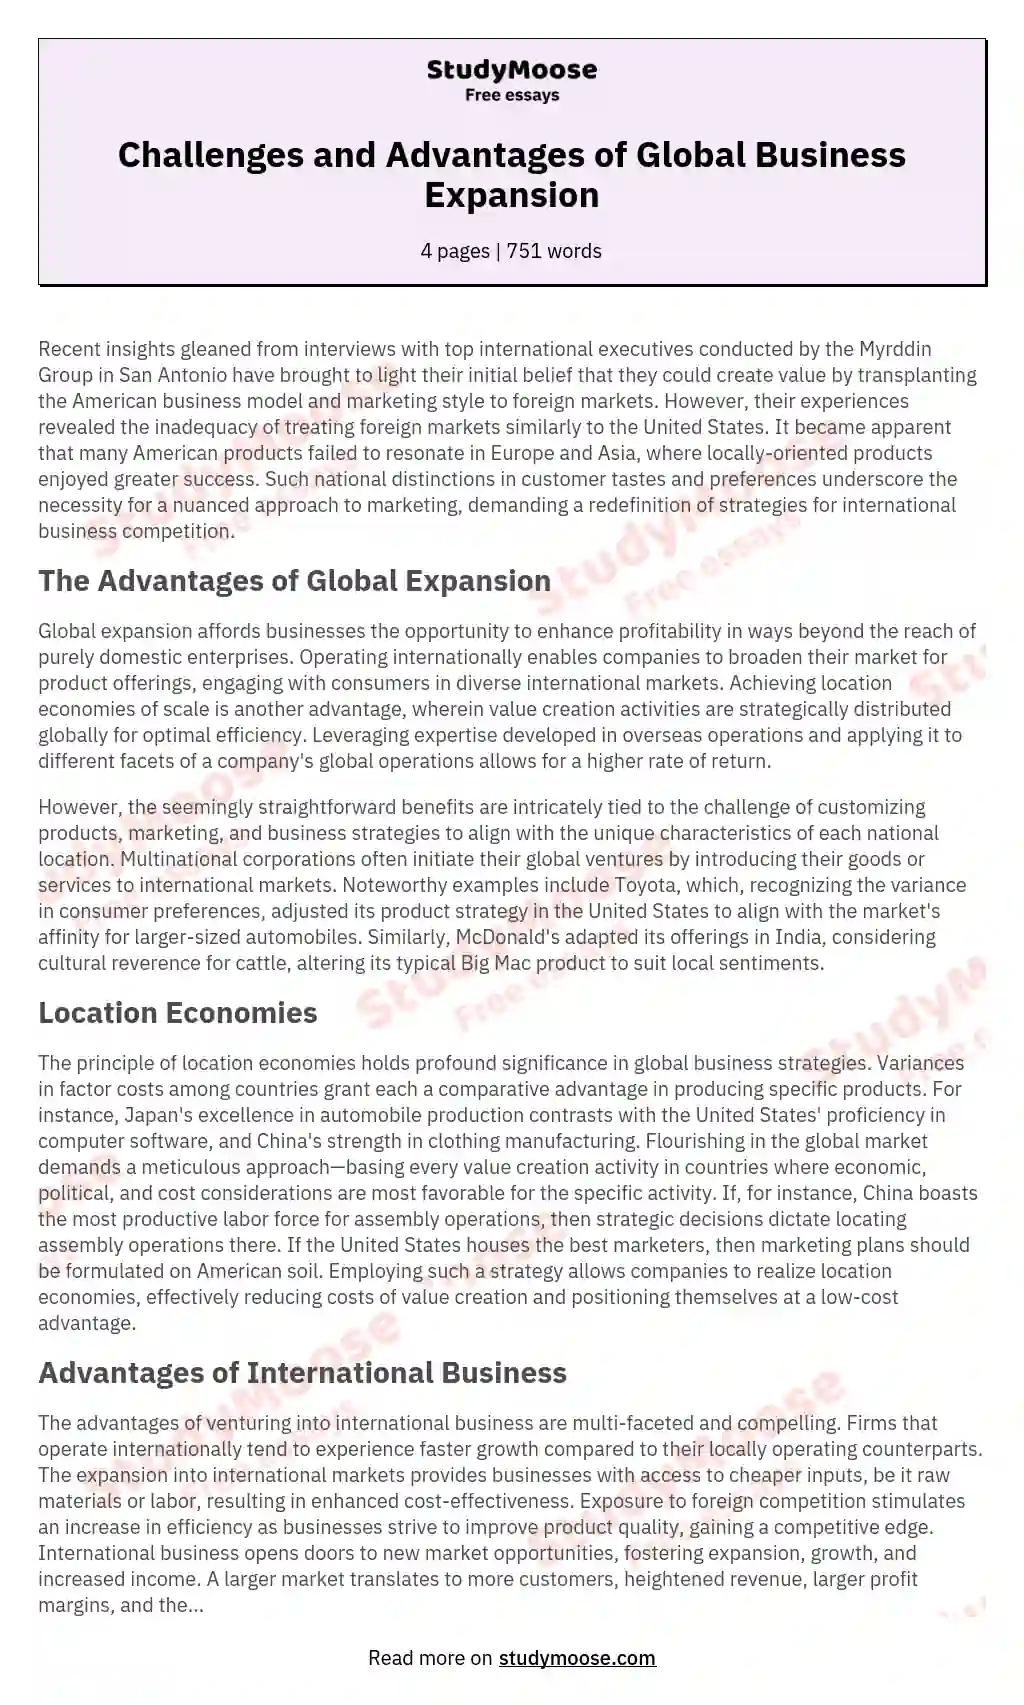 Challenges and Advantages of Global Business Expansion essay